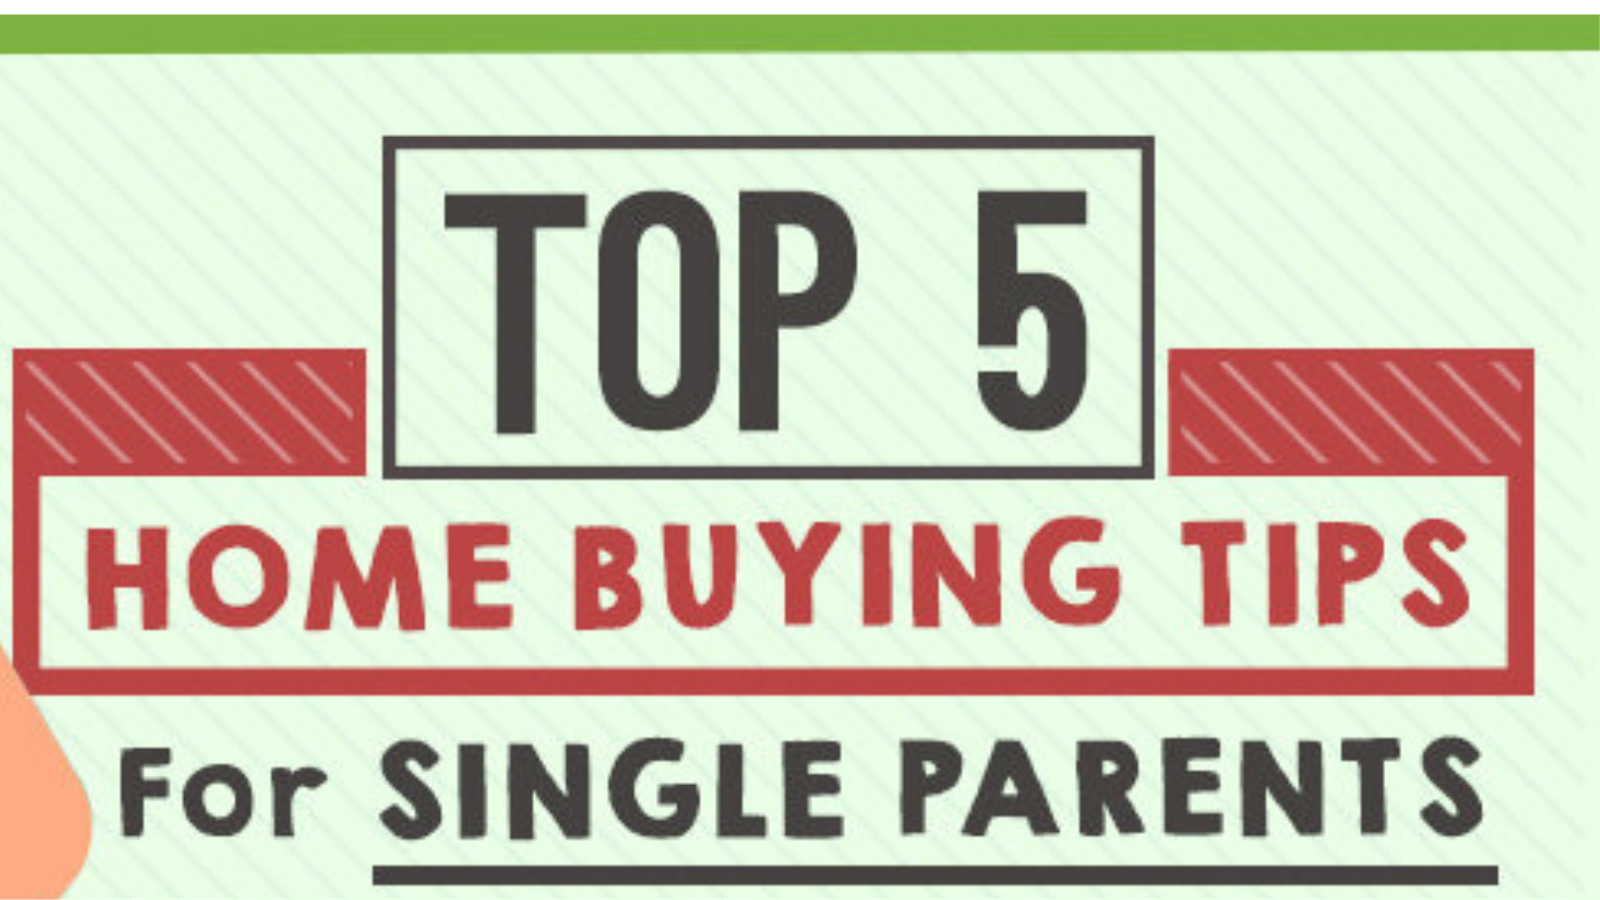 Top 5 Home Buying Tips For Single Parents